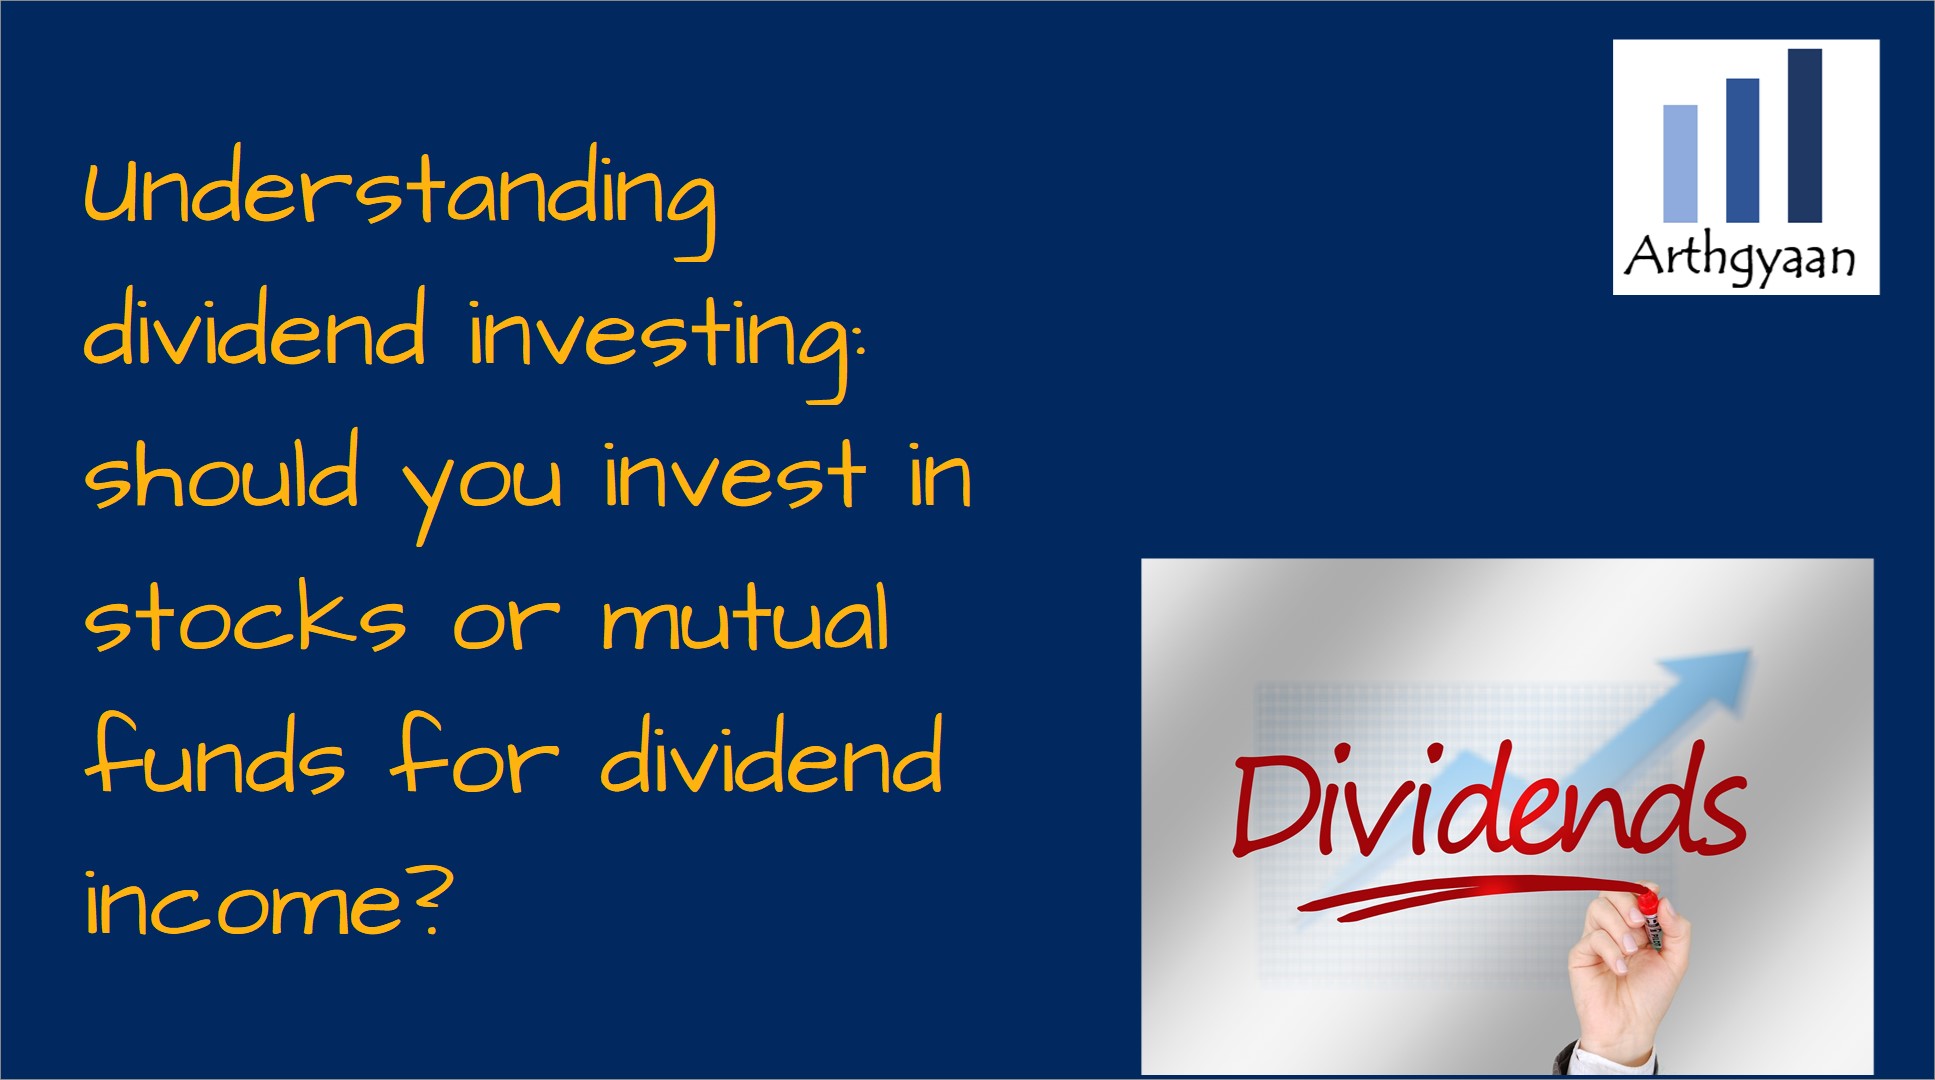 Understanding dividend investing: should you invest in stocks or mutual funds for dividend income?